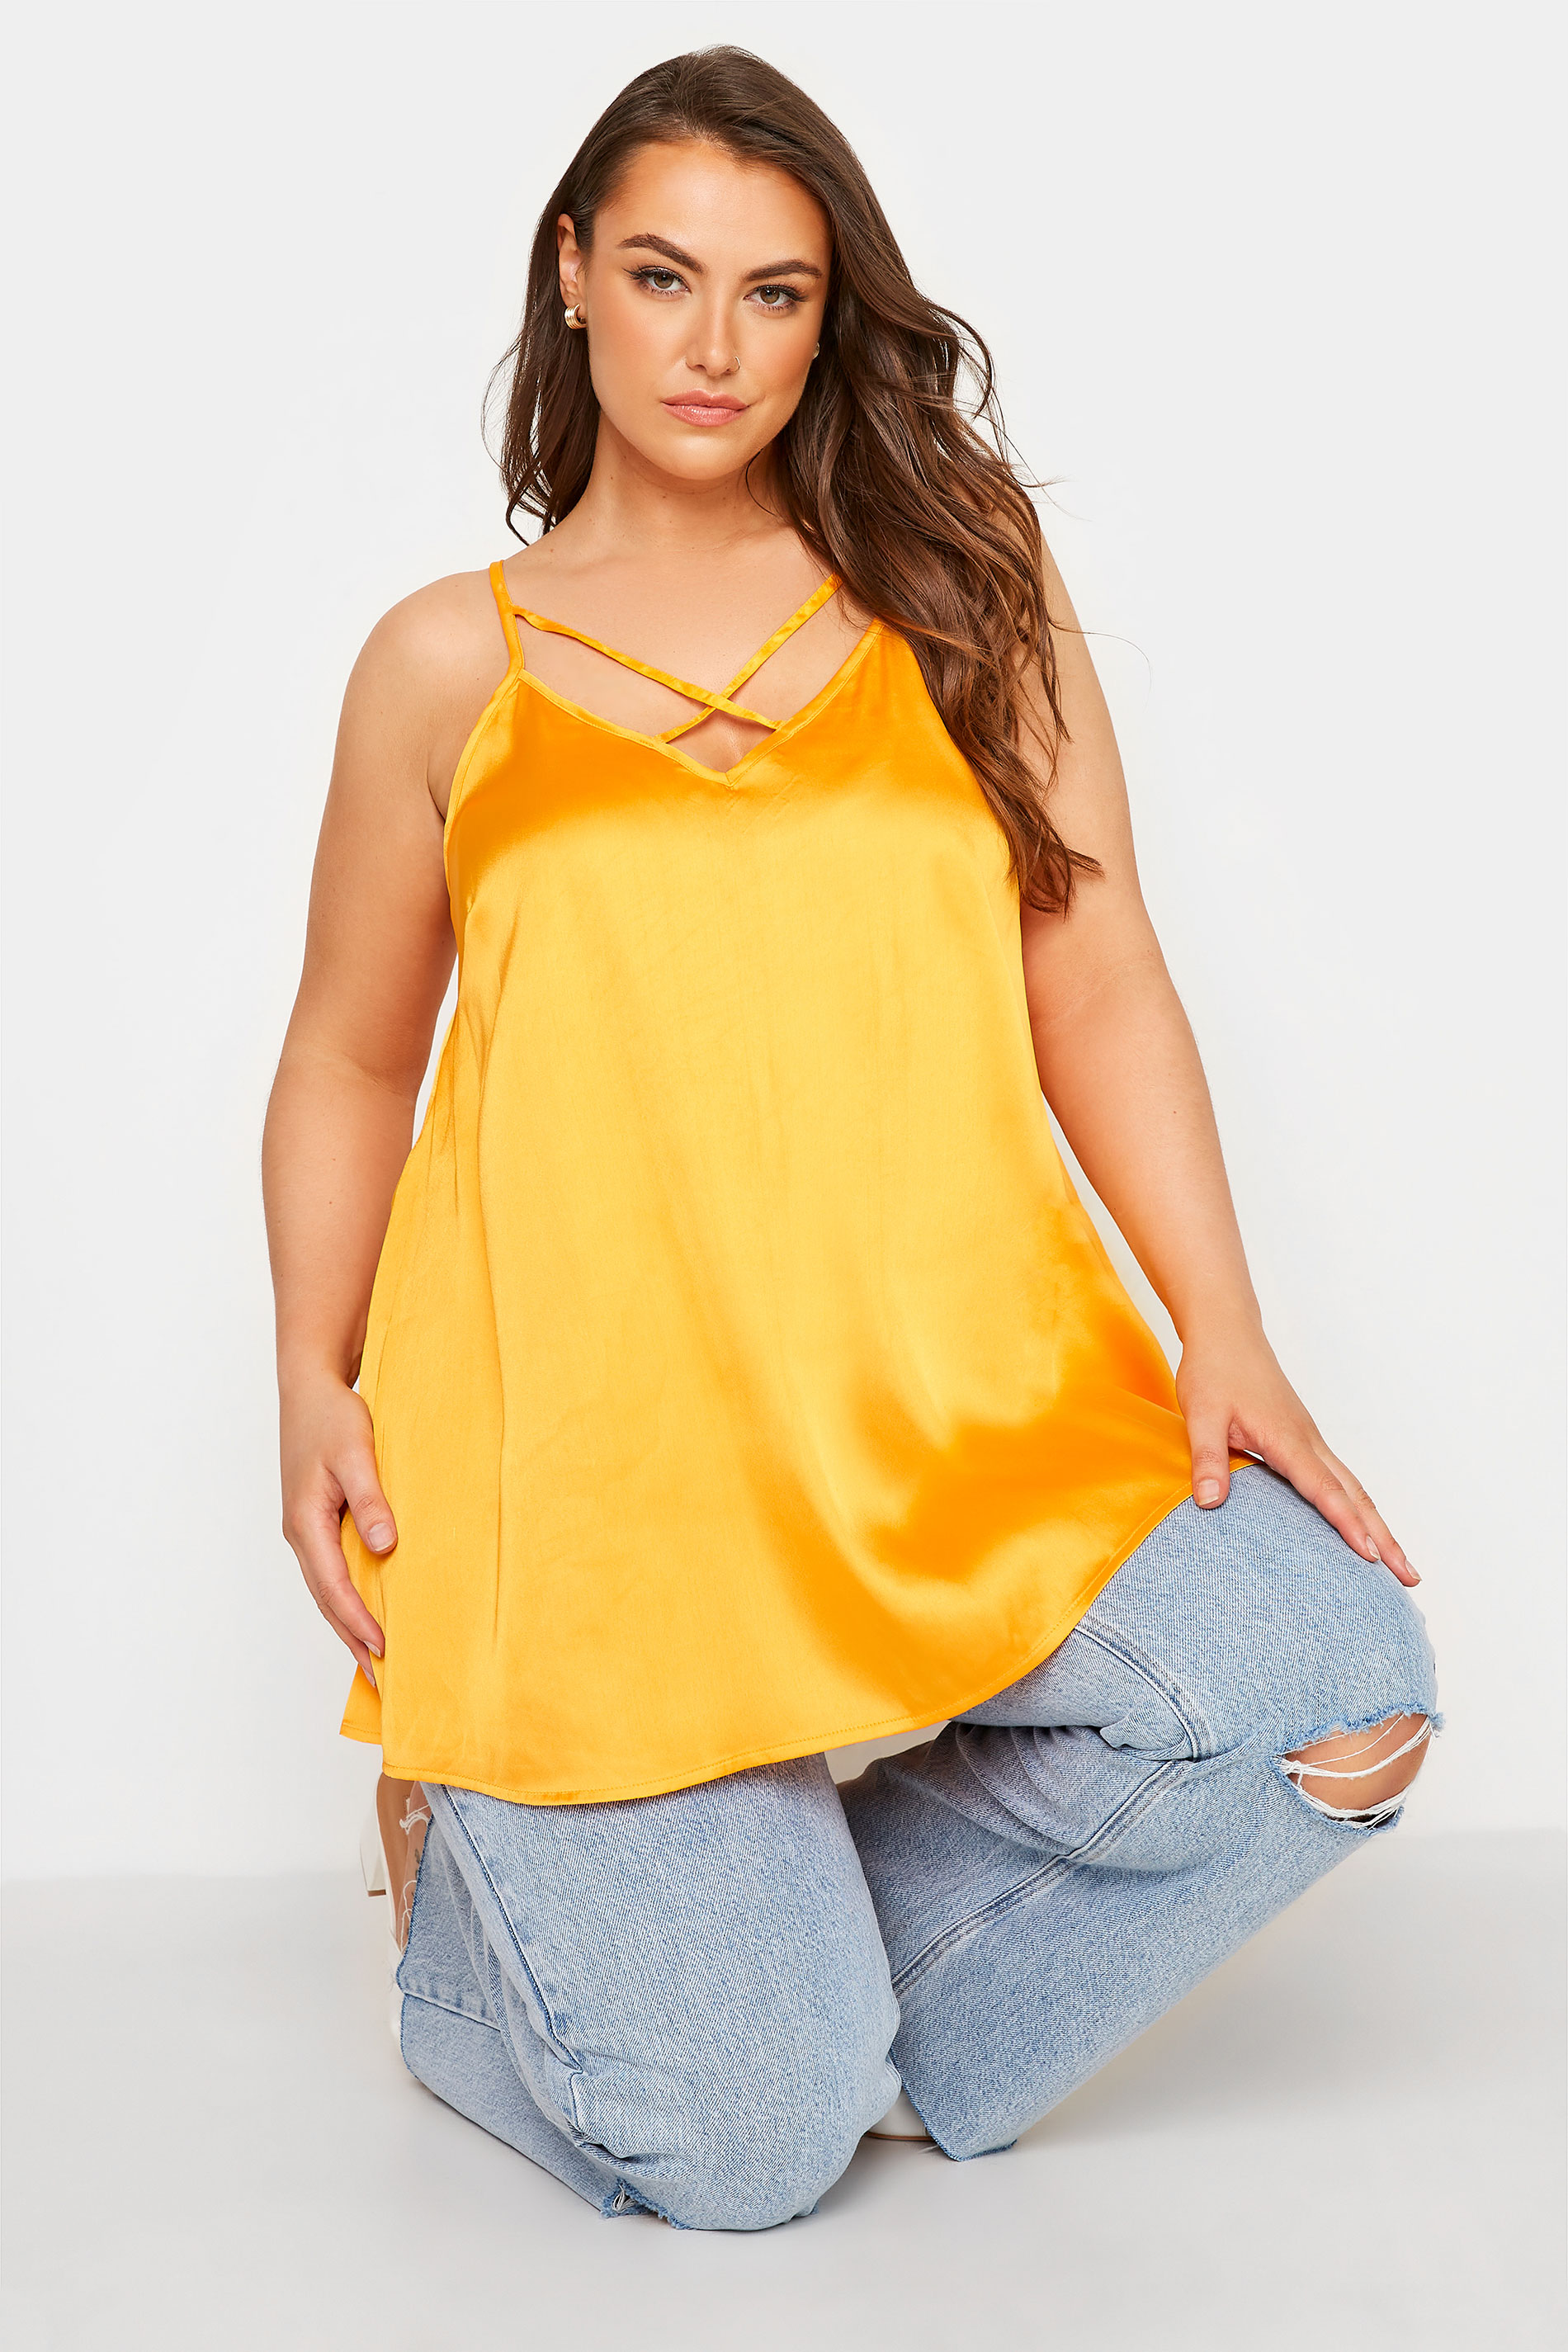 LIMITED COLLECTION Plus Size Bright Yellow Satin Cami Top | Yours Clothing  1